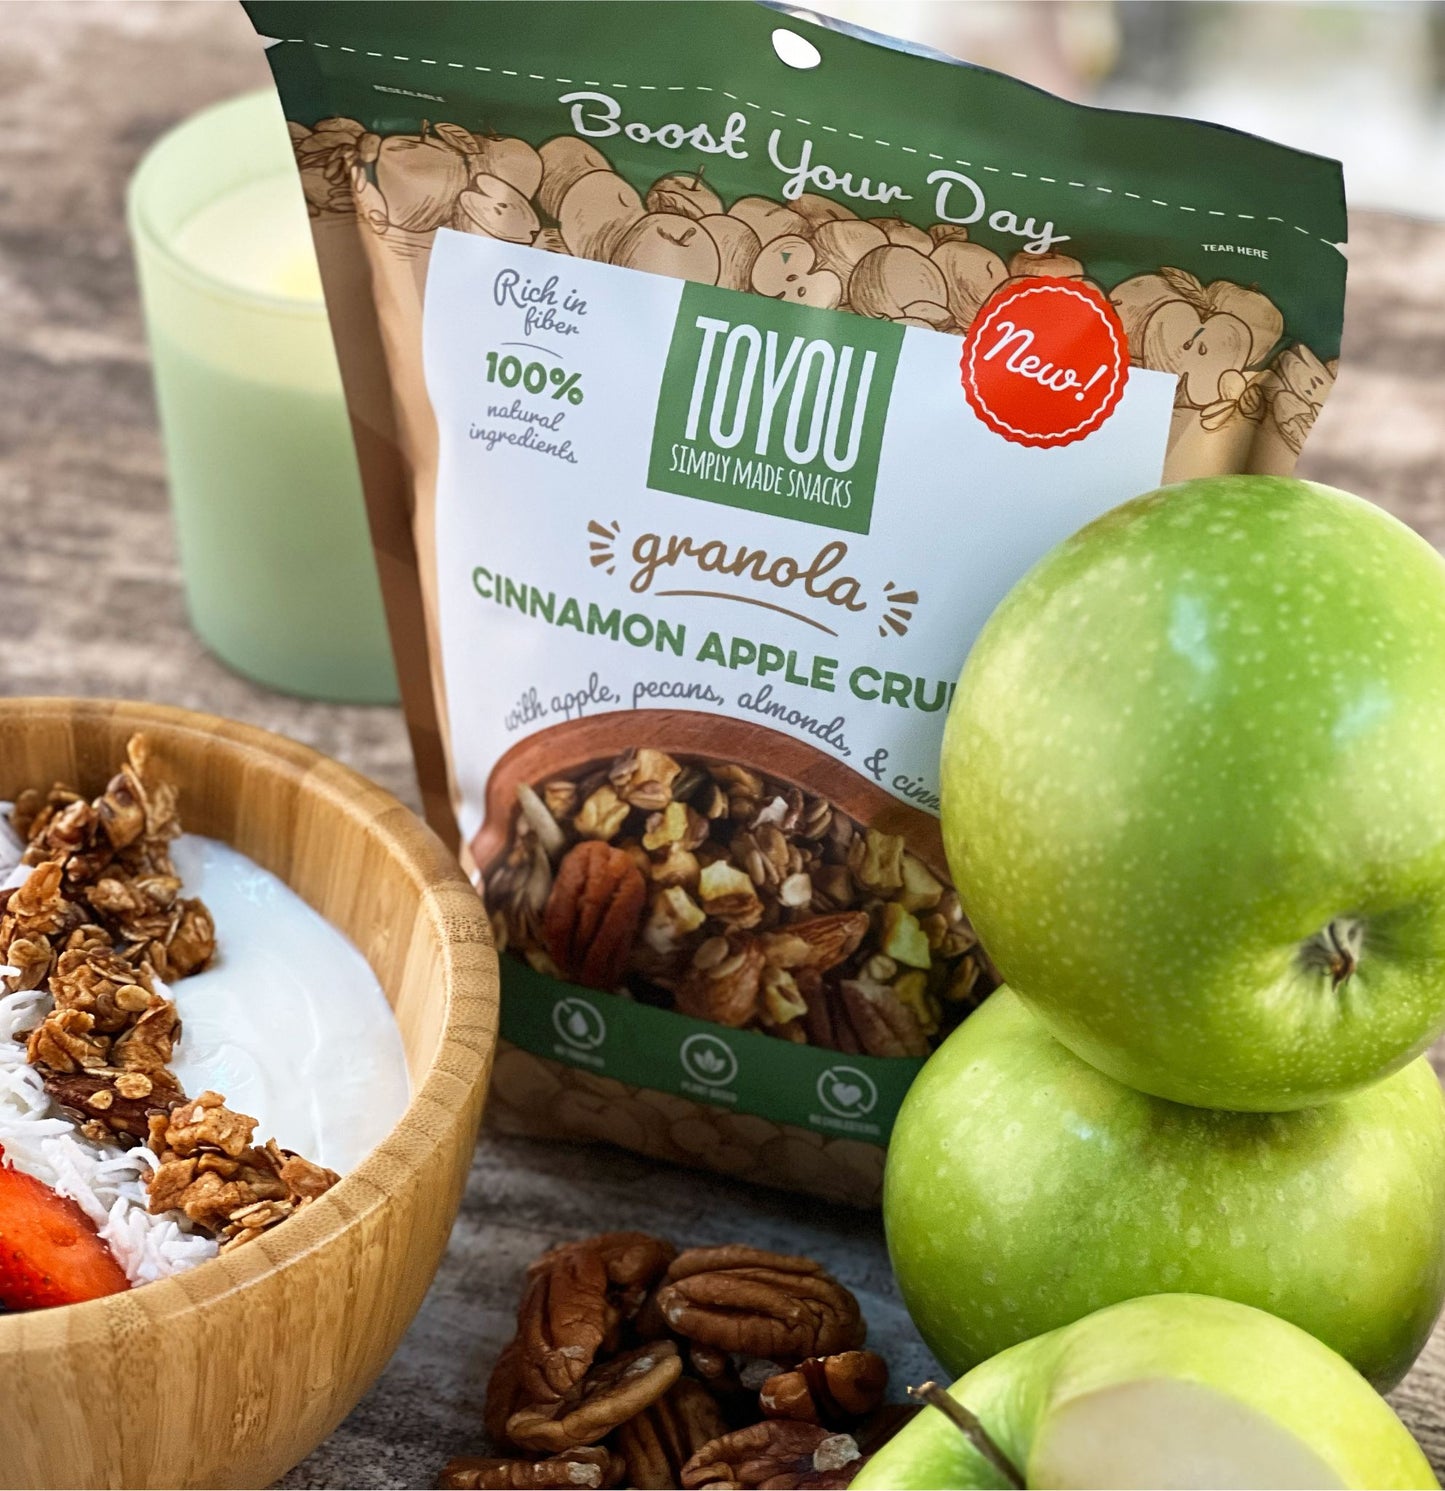 Isometric view: Green granola pouch on wood surface (Artwork: top view photo, wooden bowl with yogurt, strawberries, shredded coconut, Cinnamon Apple Crunch ToYou Granola). Behind pouch: Green candle. Front right: Two green apples, sliced green apple half